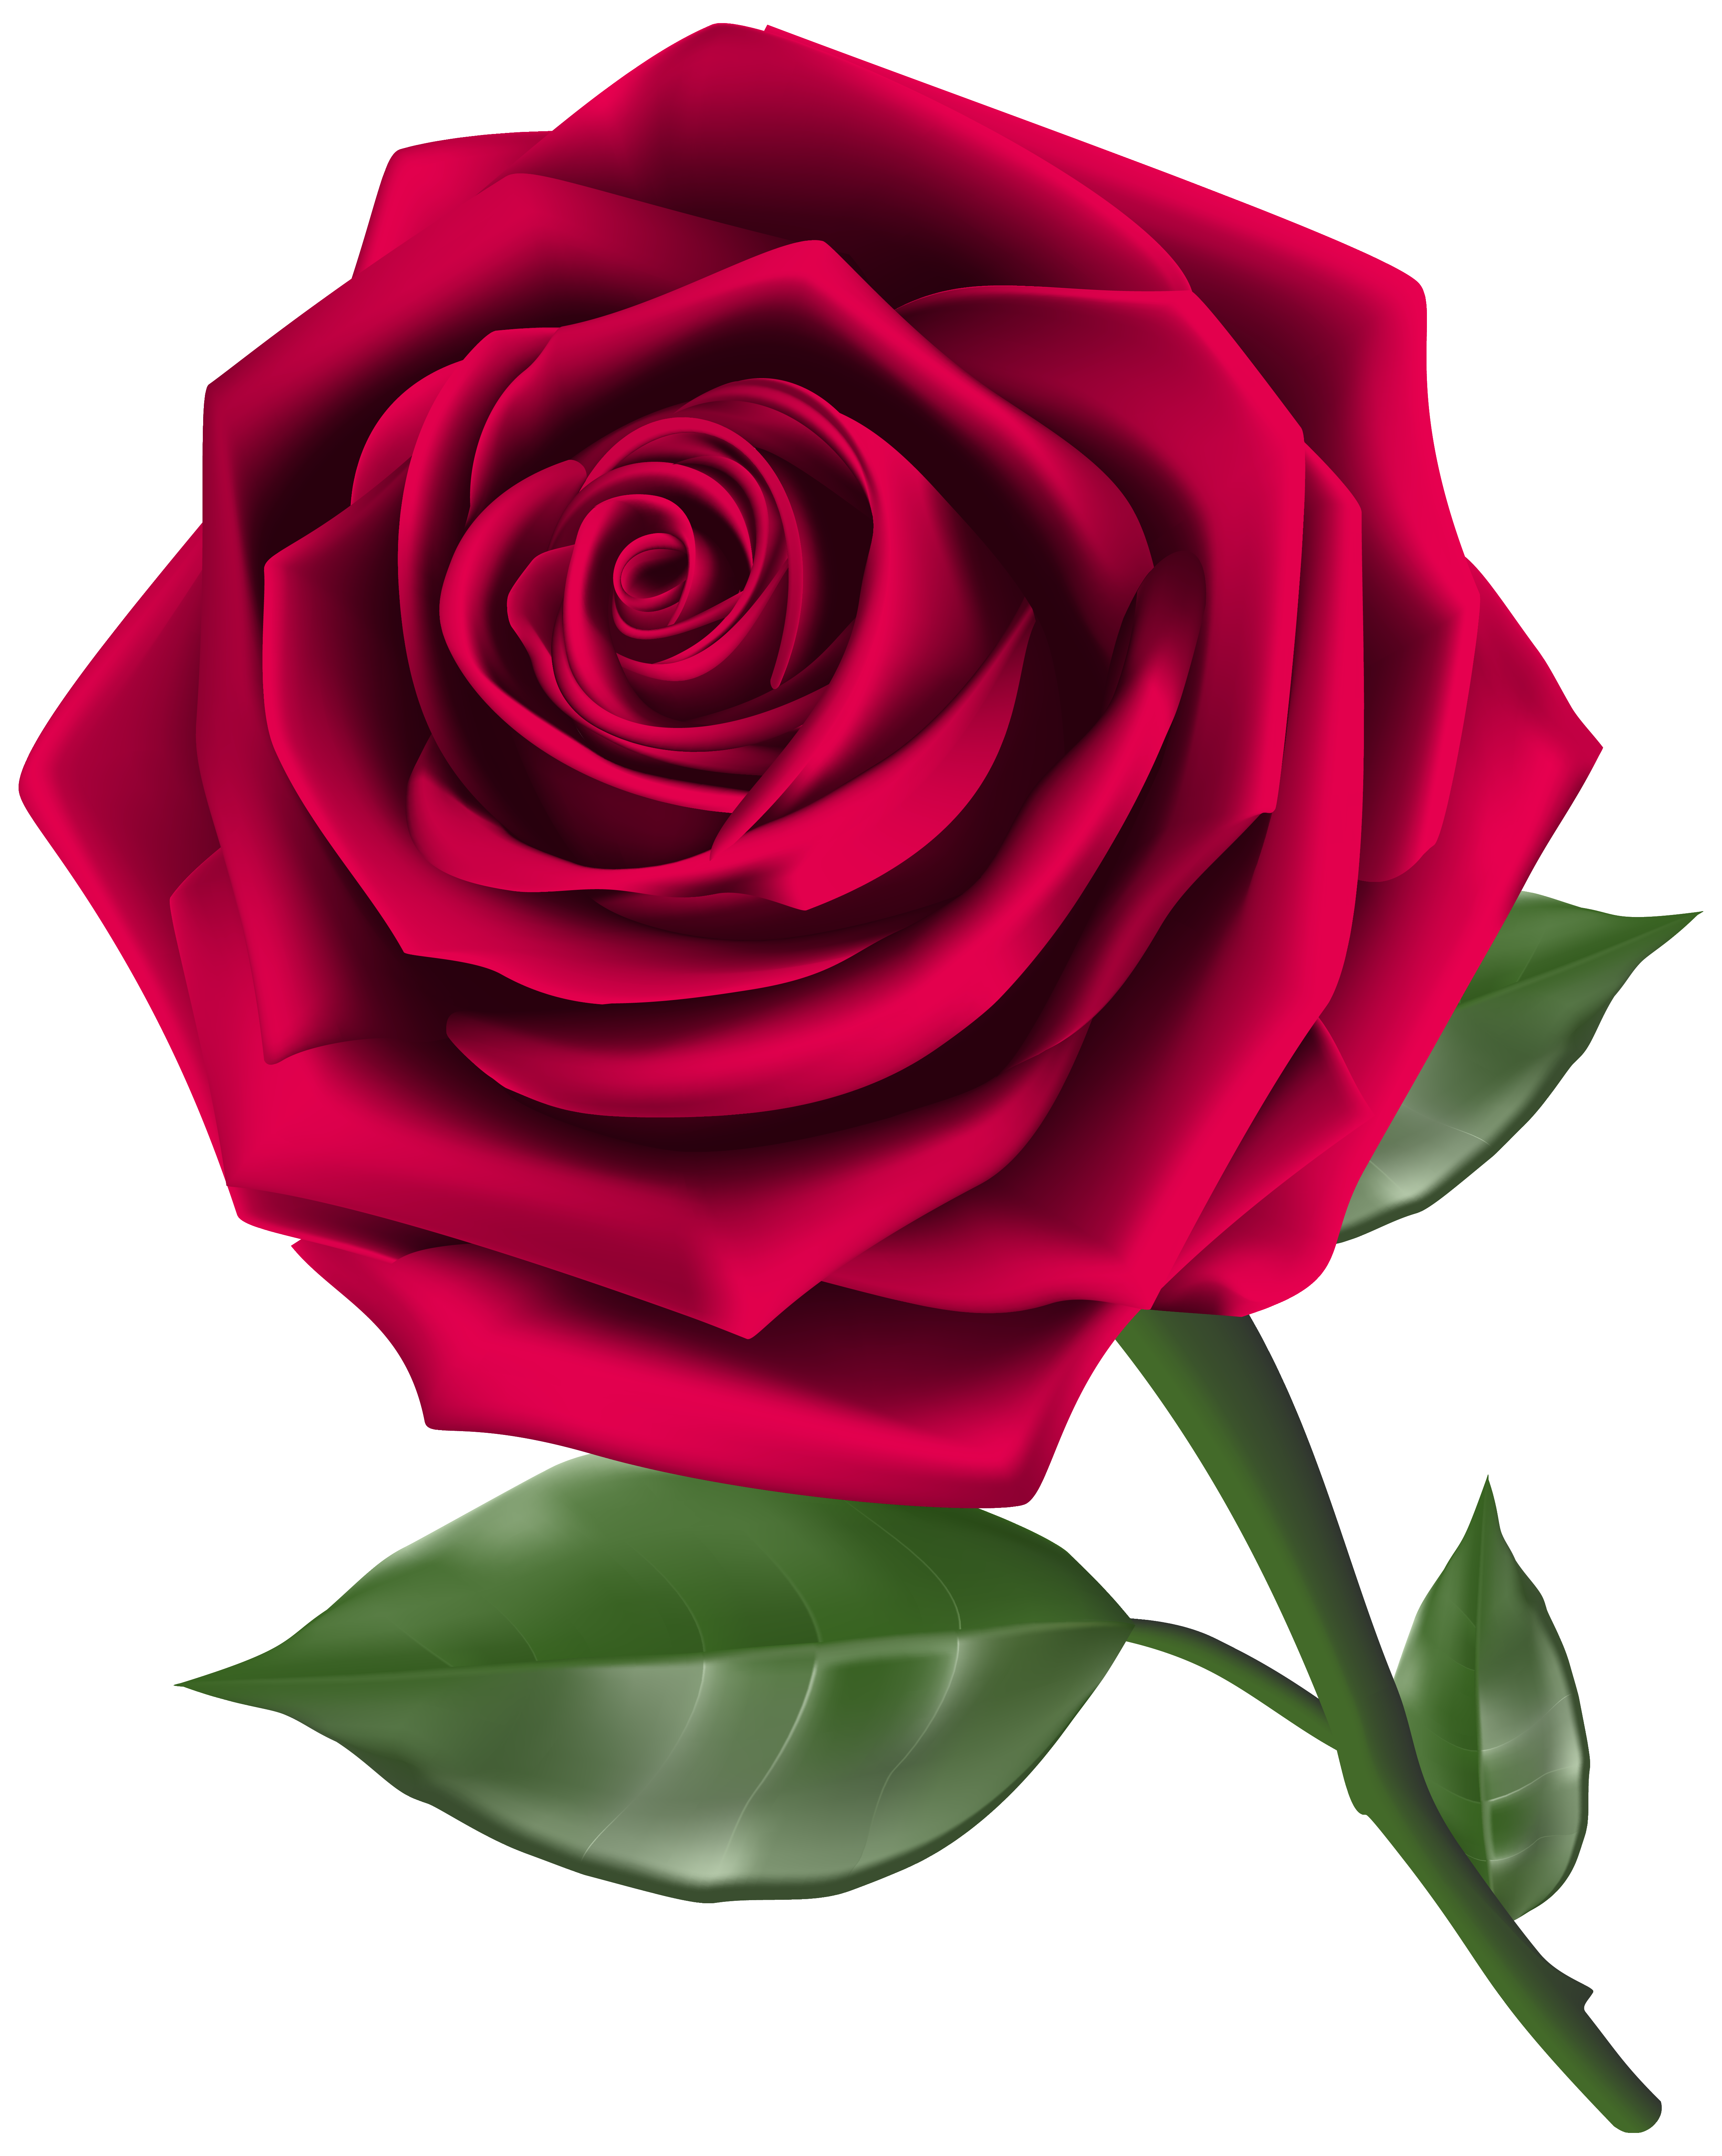 Roses steam rose clipart image